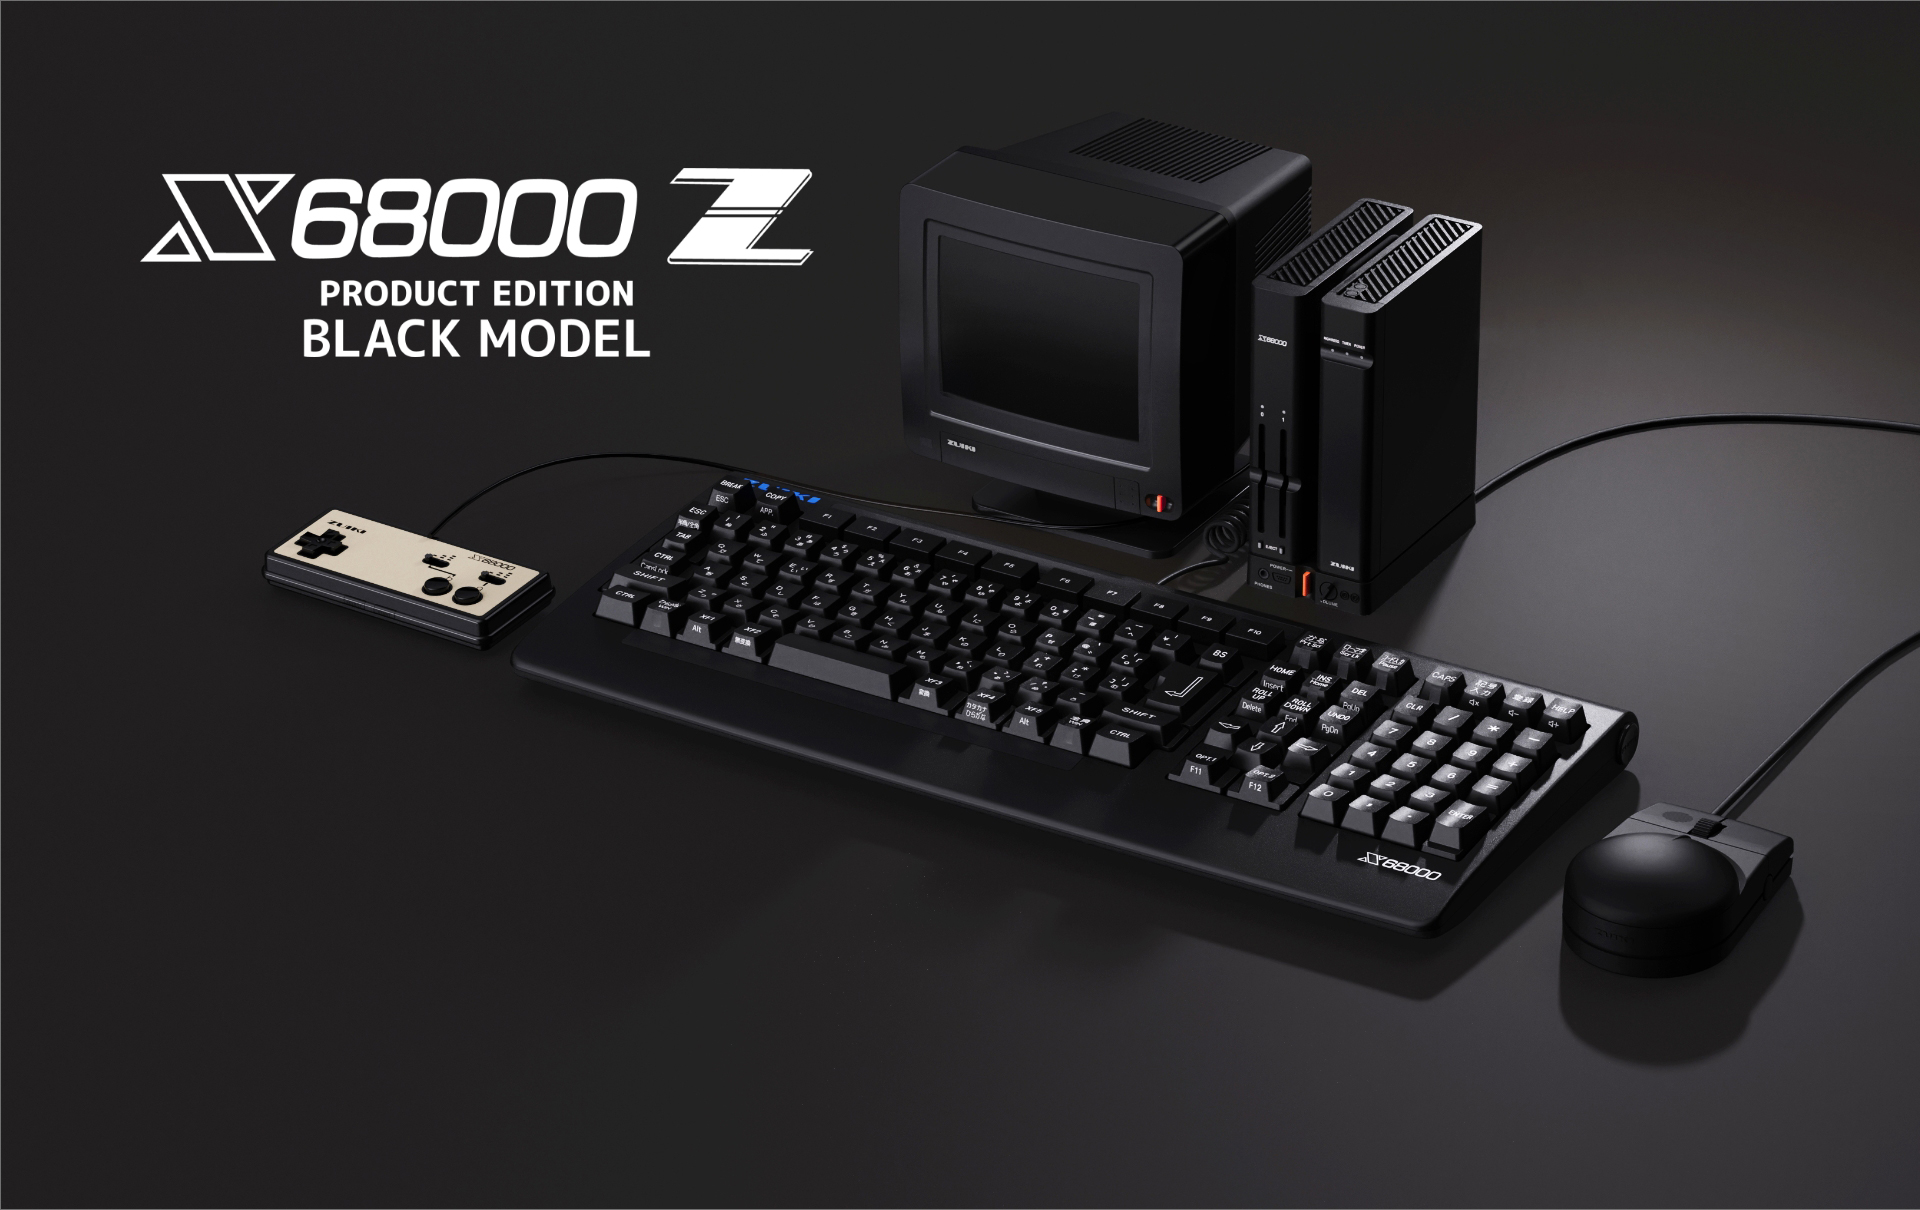 X68000 Z PRODUCT EDITION